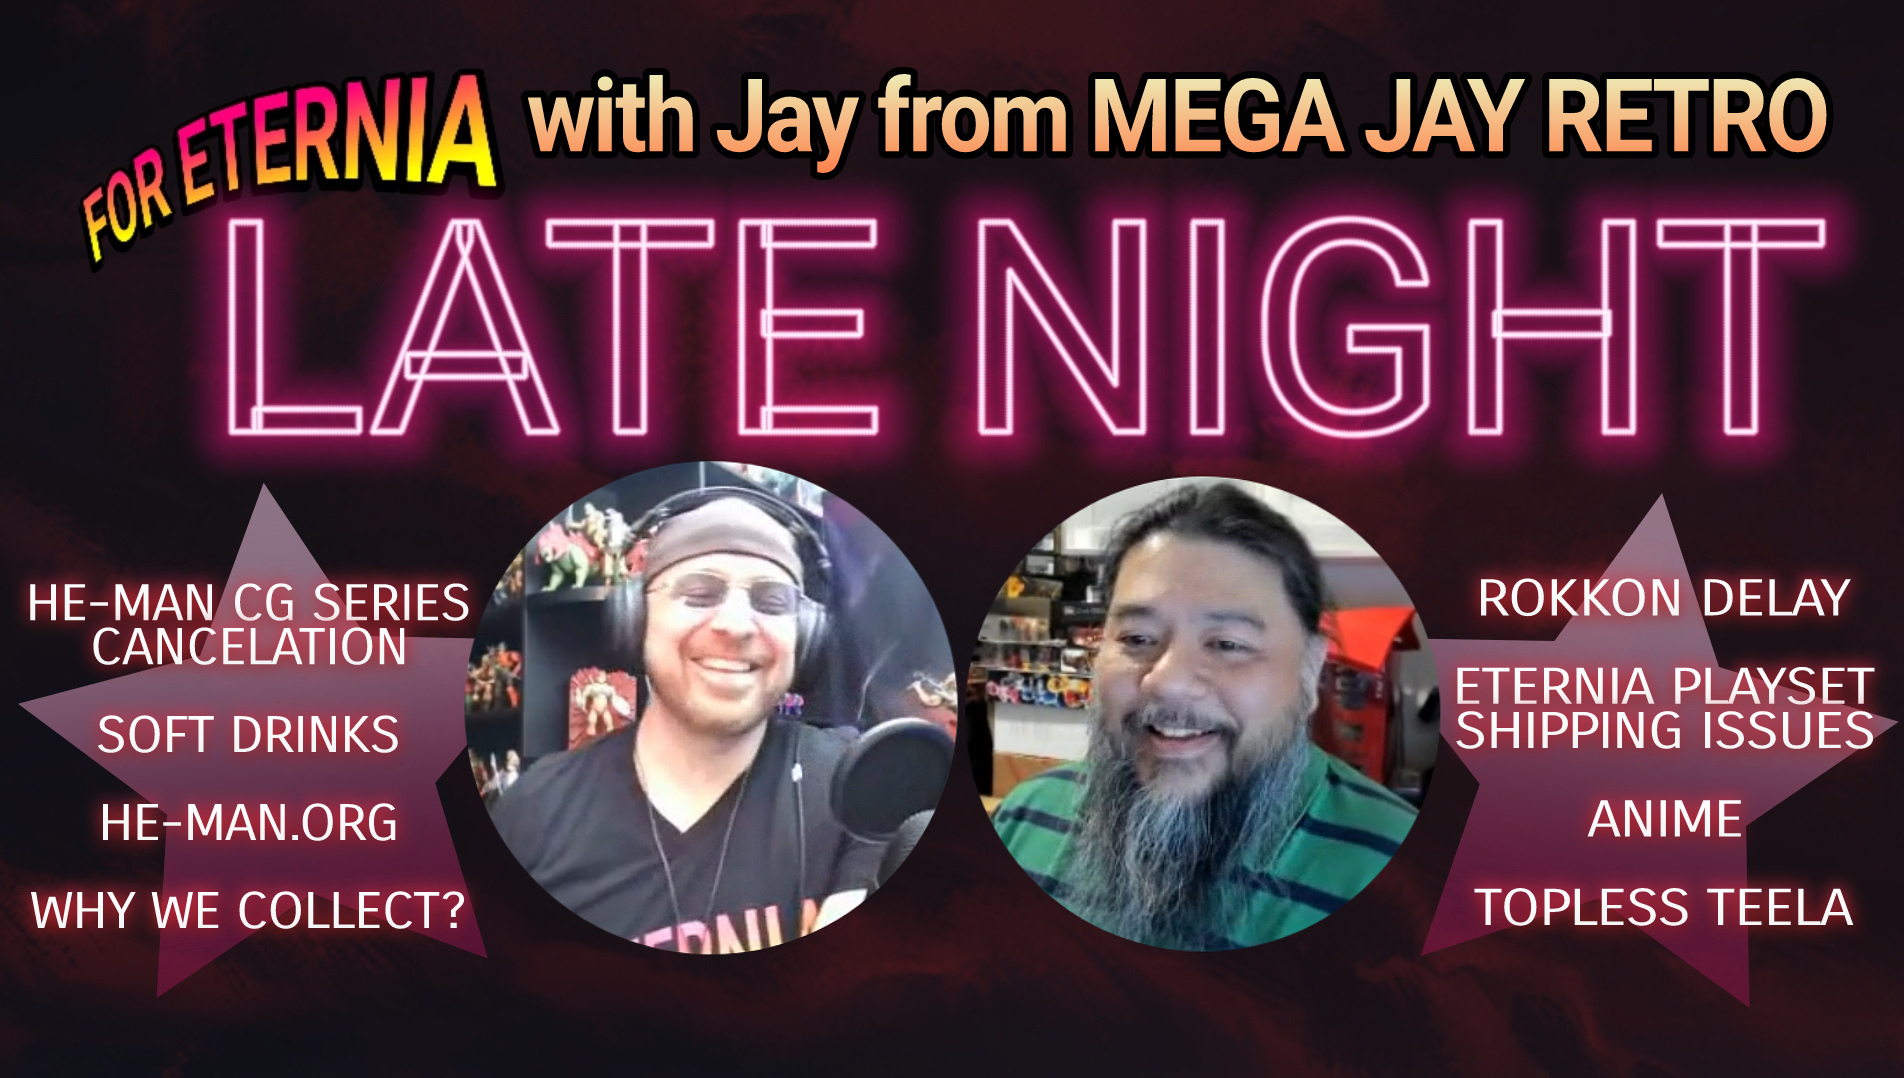 FOR ETERNIA LATE NIGHT! Podcasting with guest Jay from the Mega Jay Retro Channel talking Masters of the Universe, Collecting and more